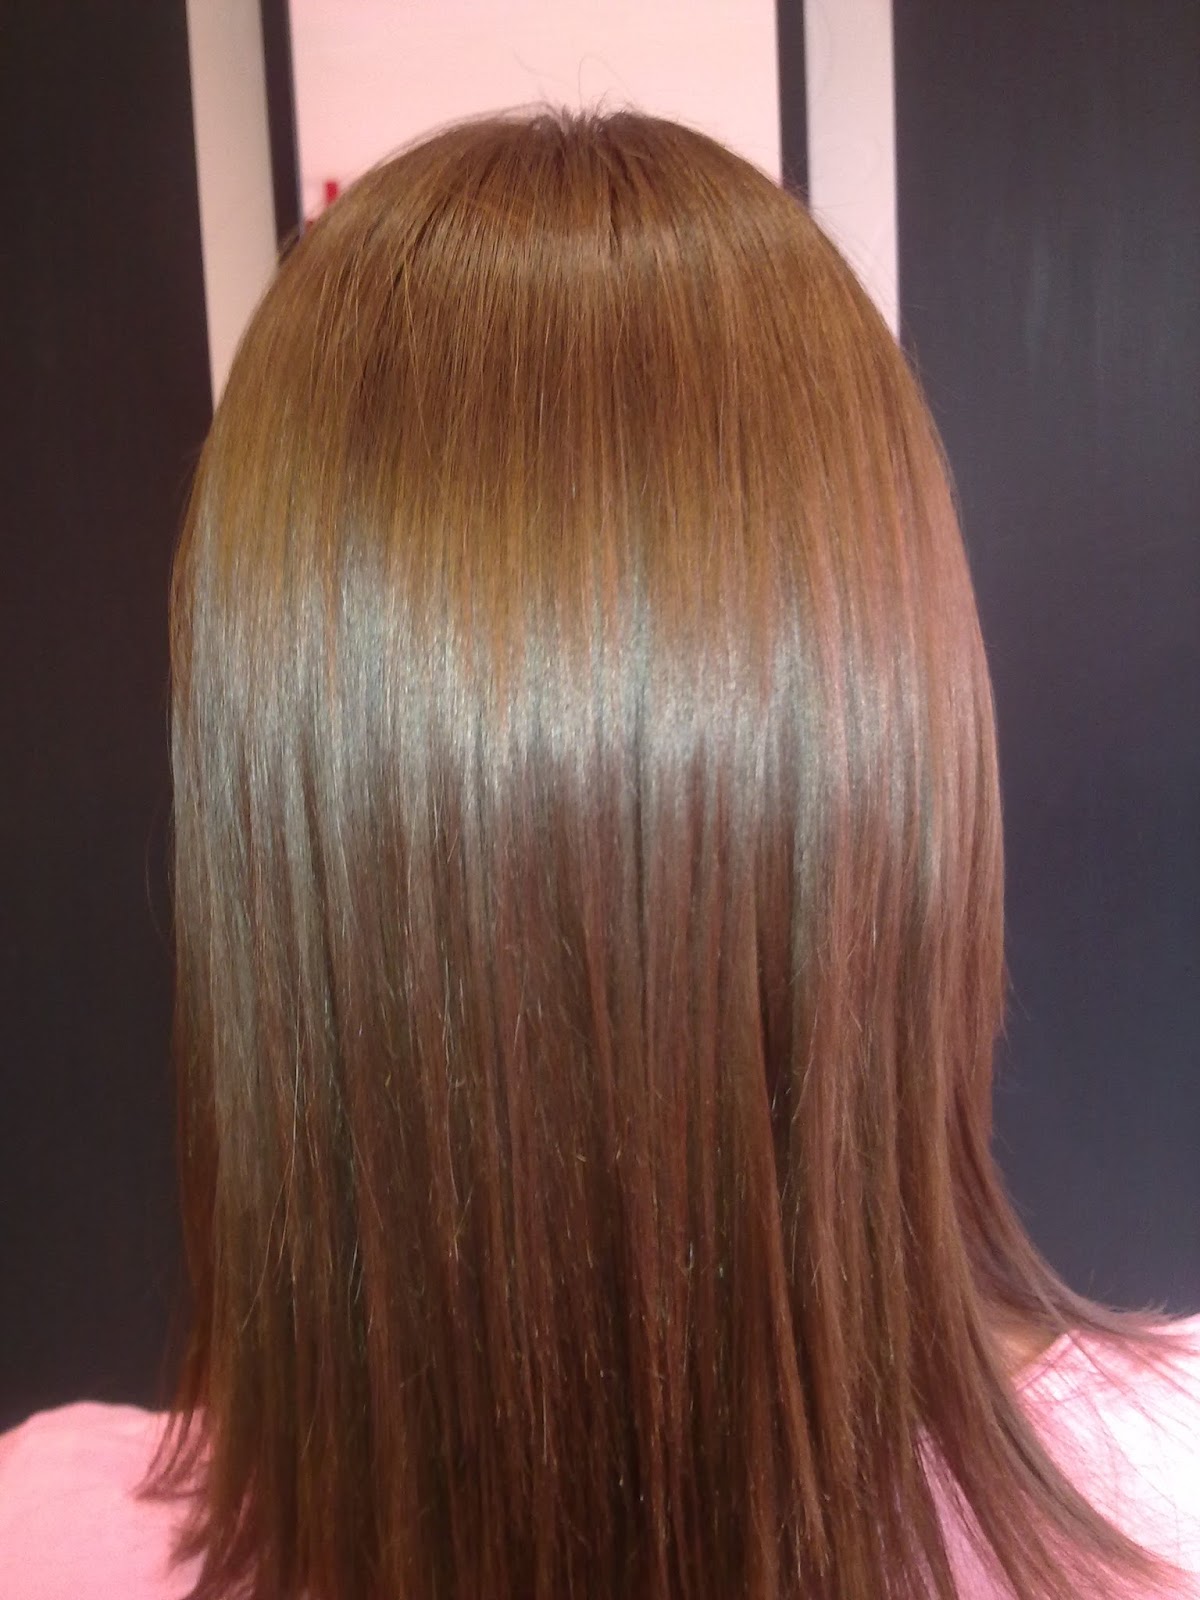 Wella Hair Color Very Dark Brown - Hair Color Highlighting And Coloring